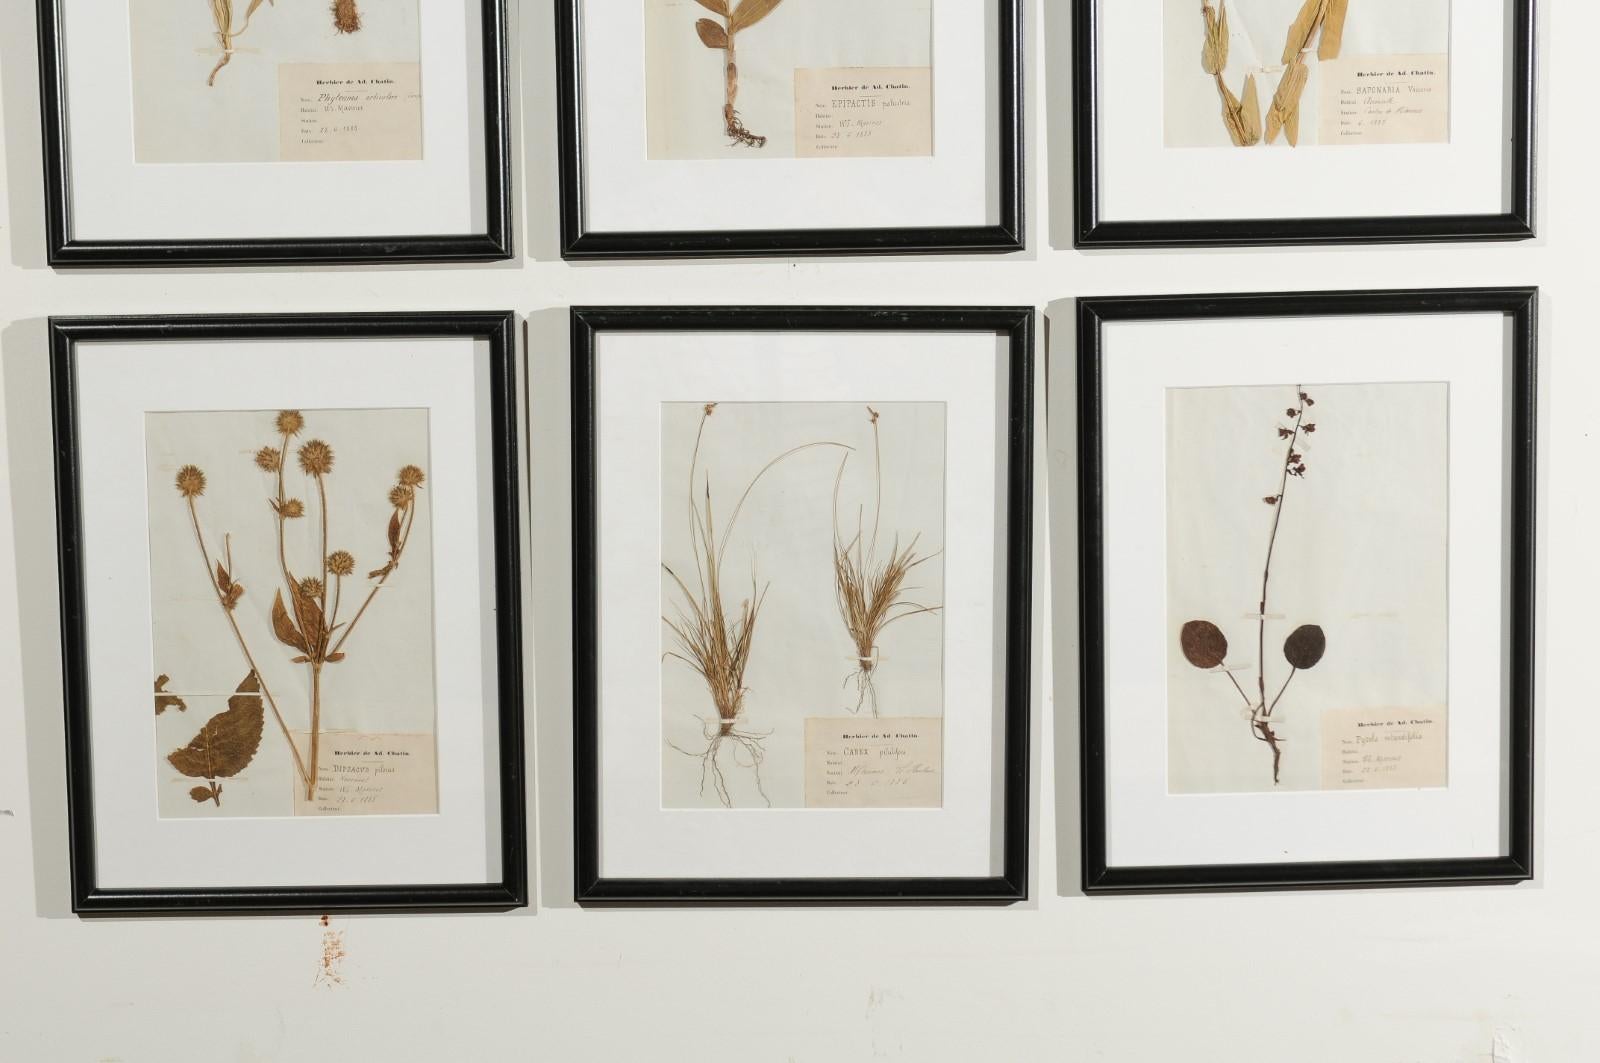 A collection of 15 French seagrass botanicals boards from the late 19th century, set inside black frames and glass, priced and sold individually. Each of these French botanicals reveals the care and patience someone took to collect and preserve the